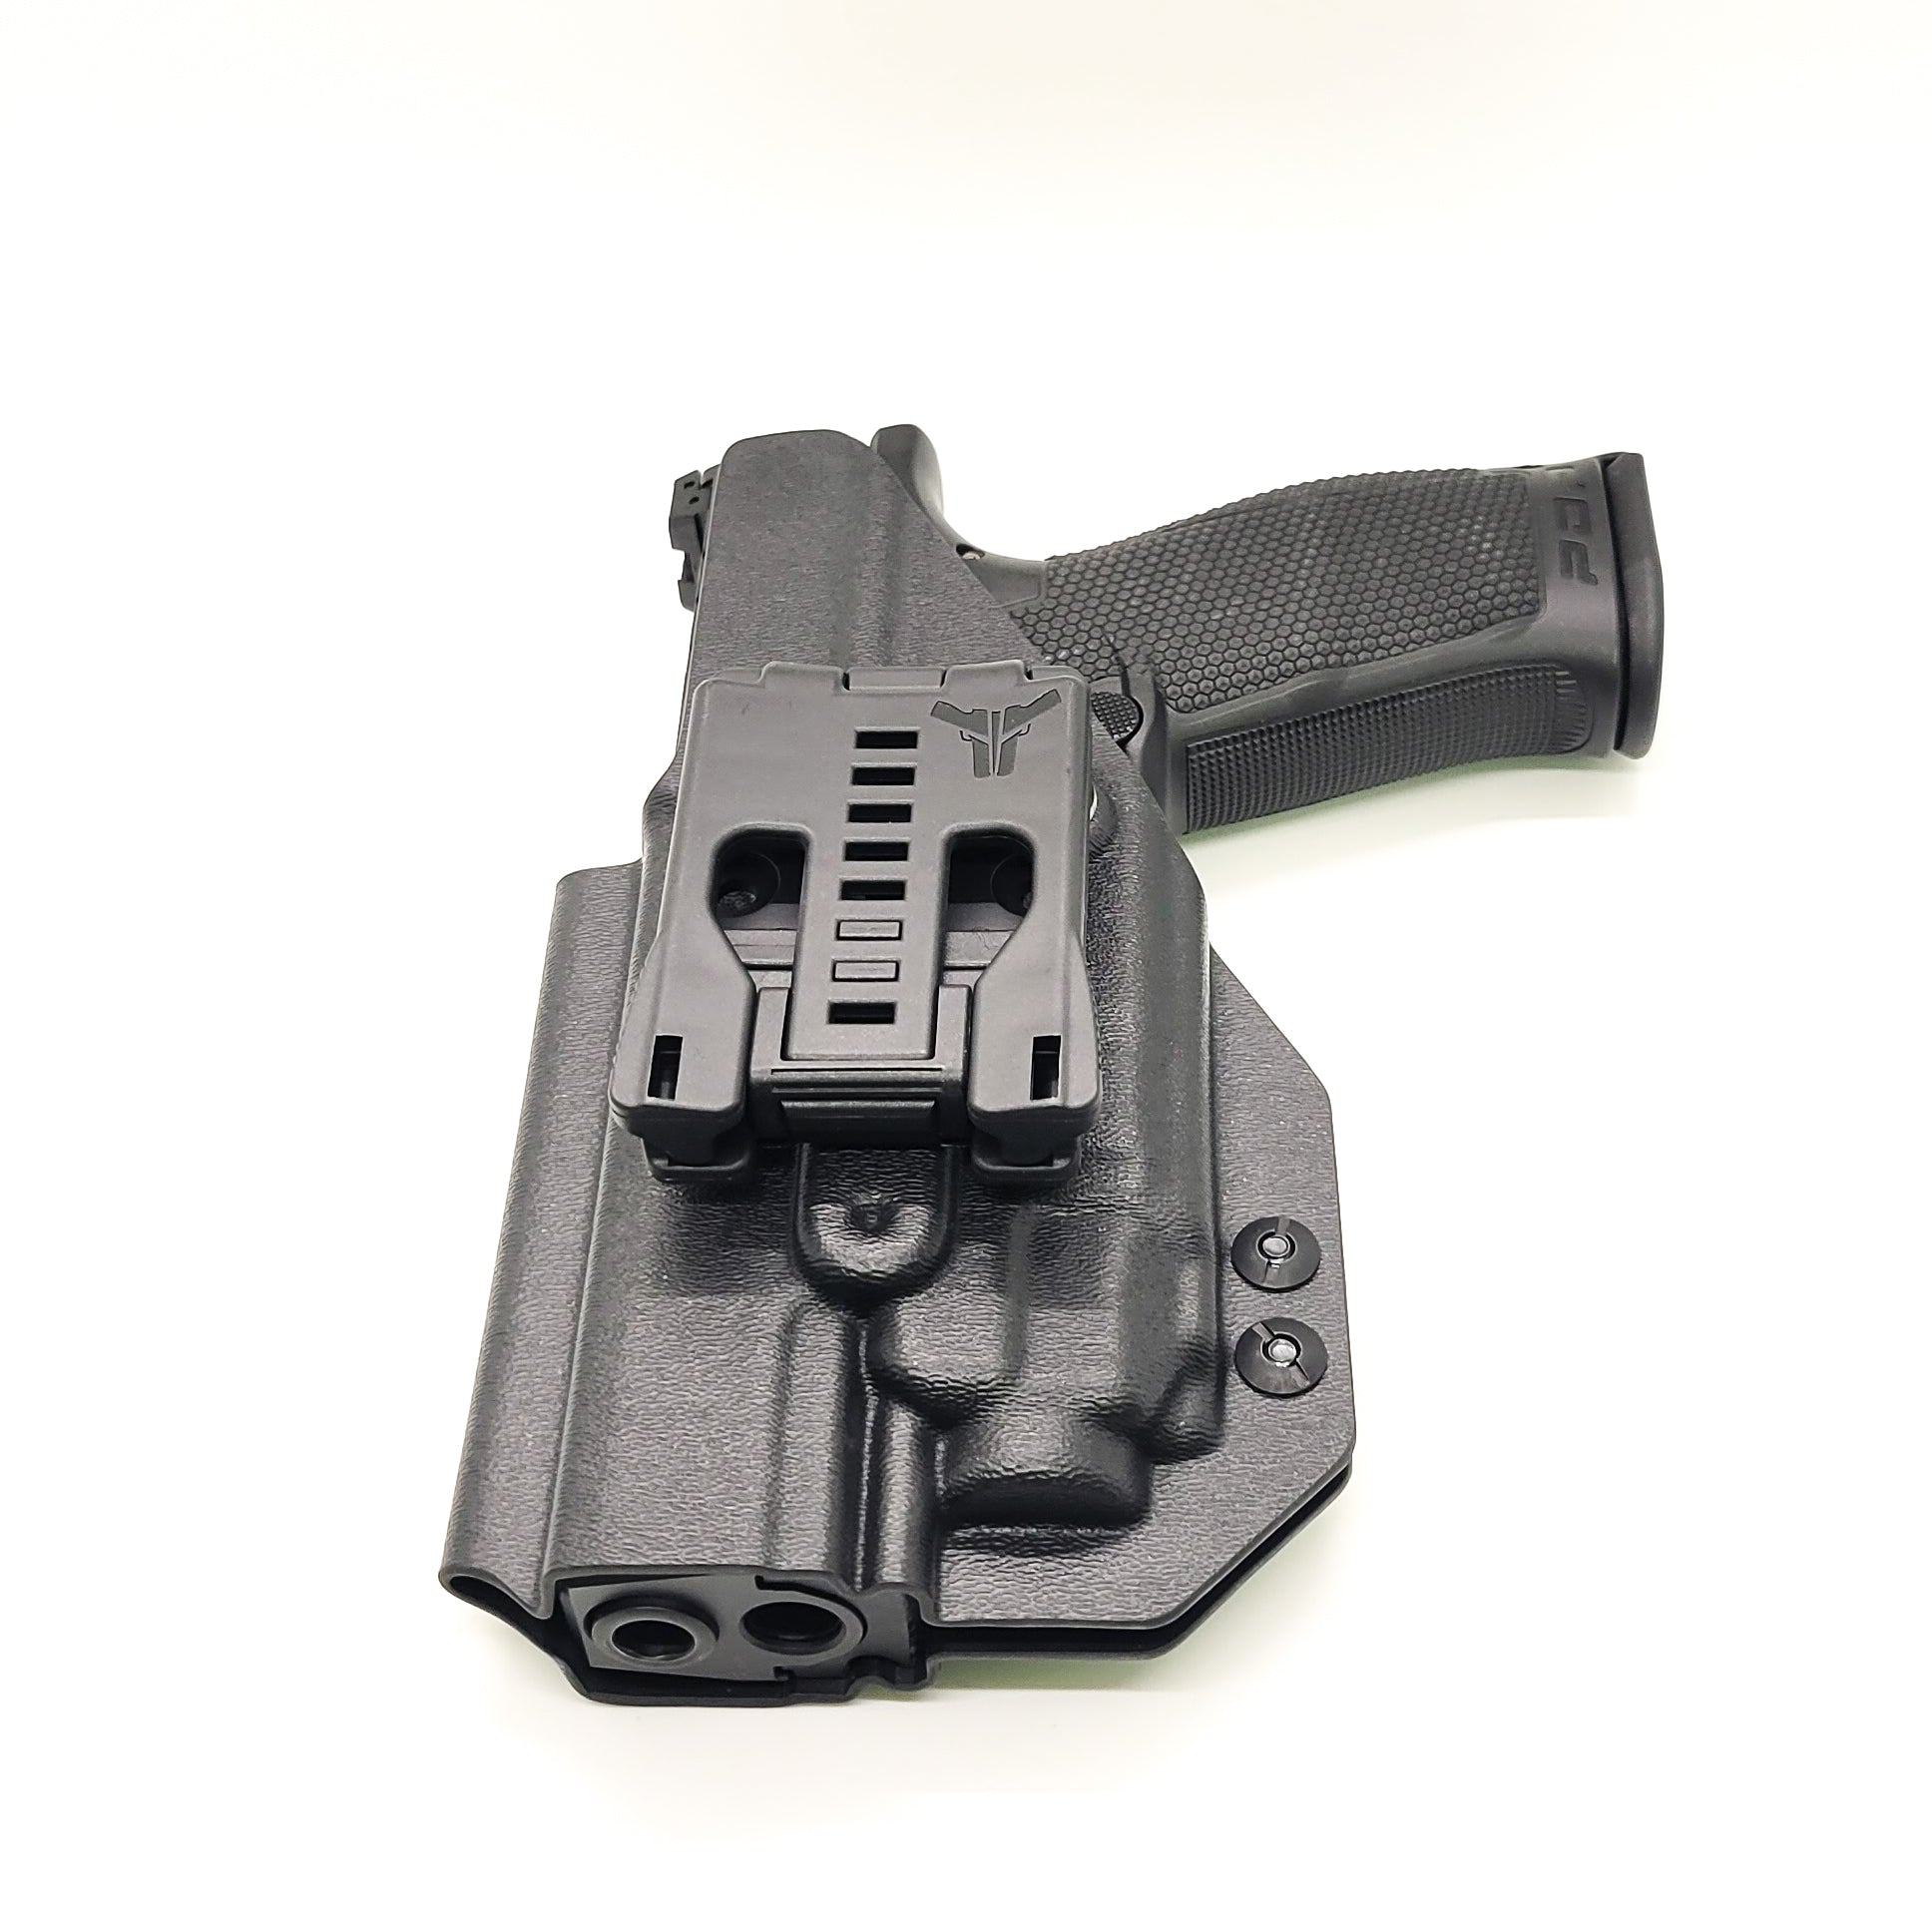 For the best Outside Waistband Taco Style Holster designed to fit the Walther PDP Pro SD Compact 4.6" pistol with a 4" slide and 4.6" threaded barrel with the Streamlight TLR-8 or TLR-8A mounted on the firearm, shop Four Brothers Holsters. Cut for red dot sight, full sweat guard, adjustable retention & open muzzle. 